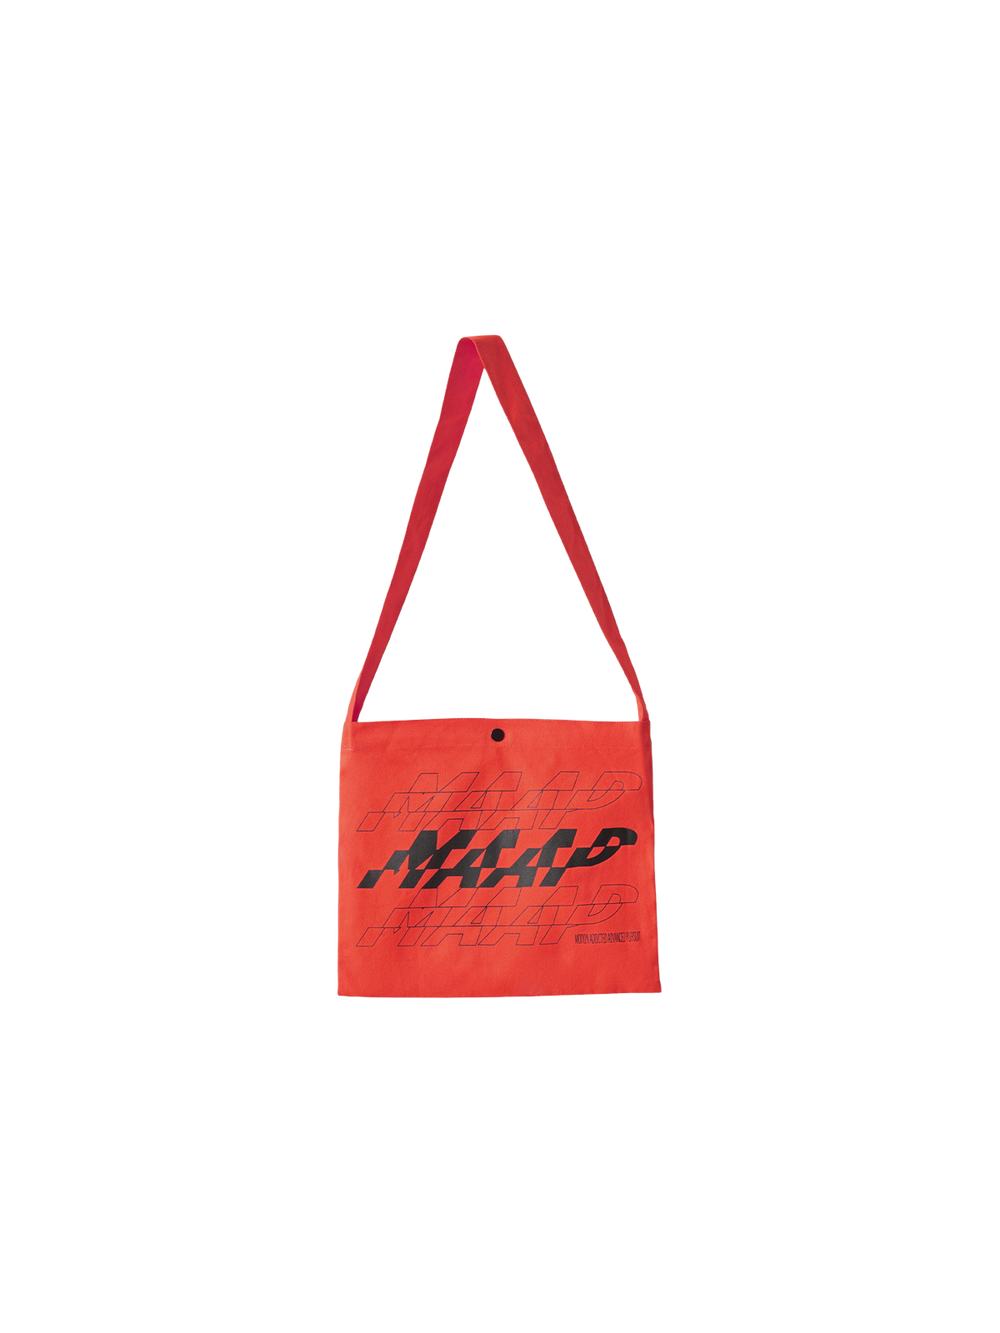 Product Image for Fragment Musette